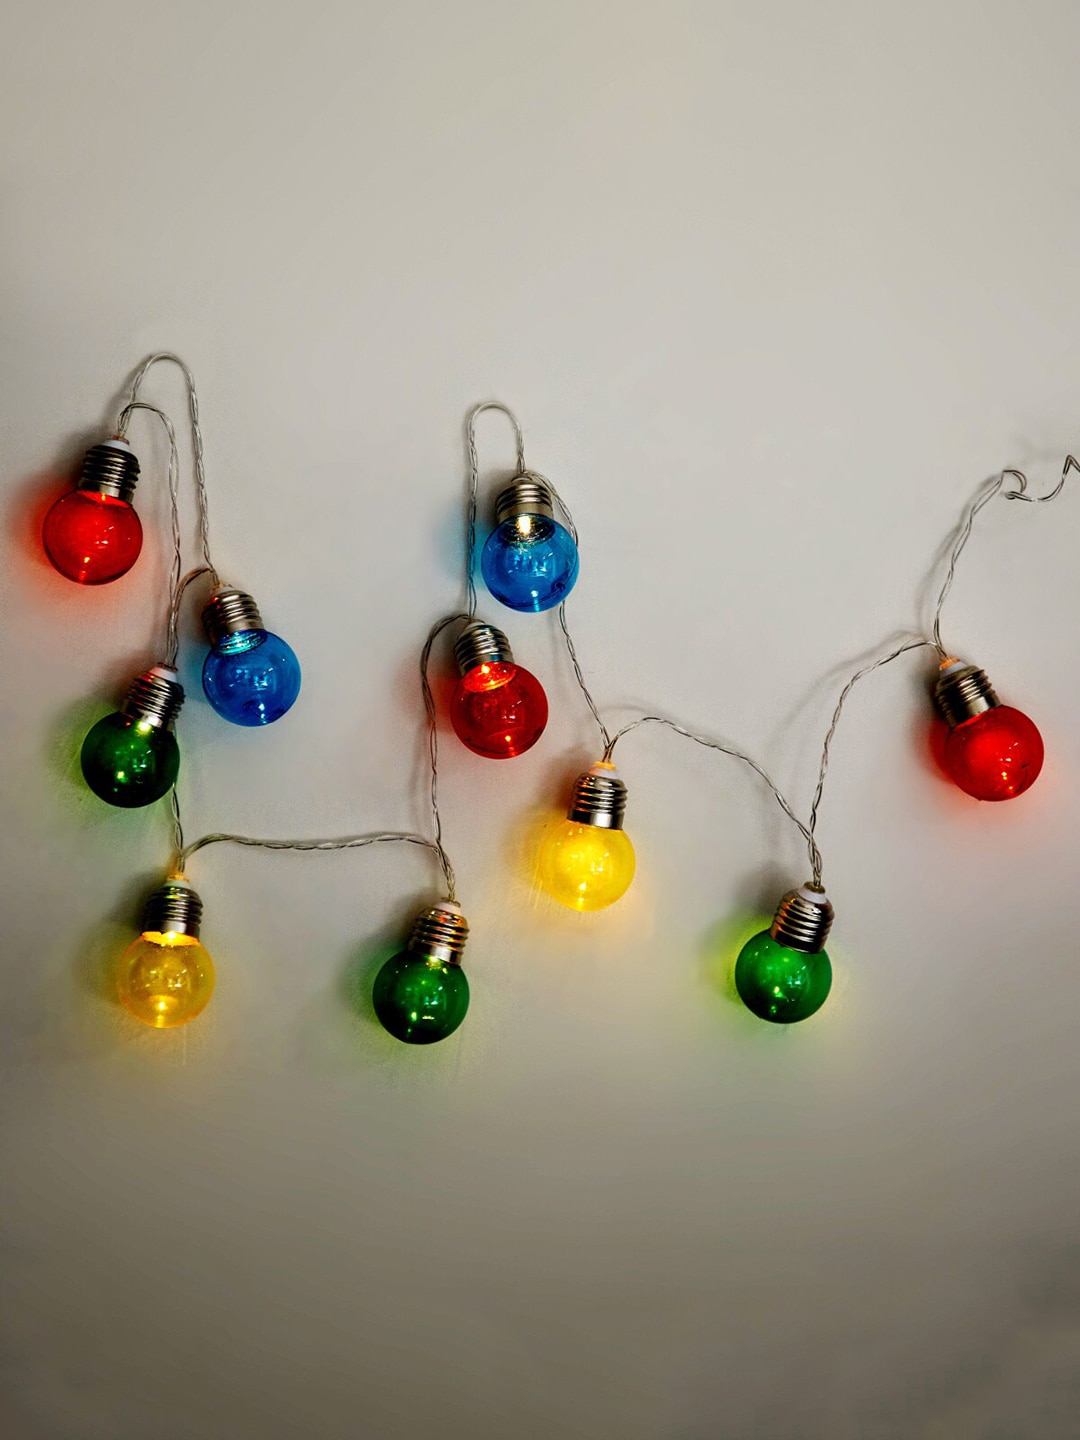 Home Centre Multicolour LED String Light of 10 Bulbs Price in India